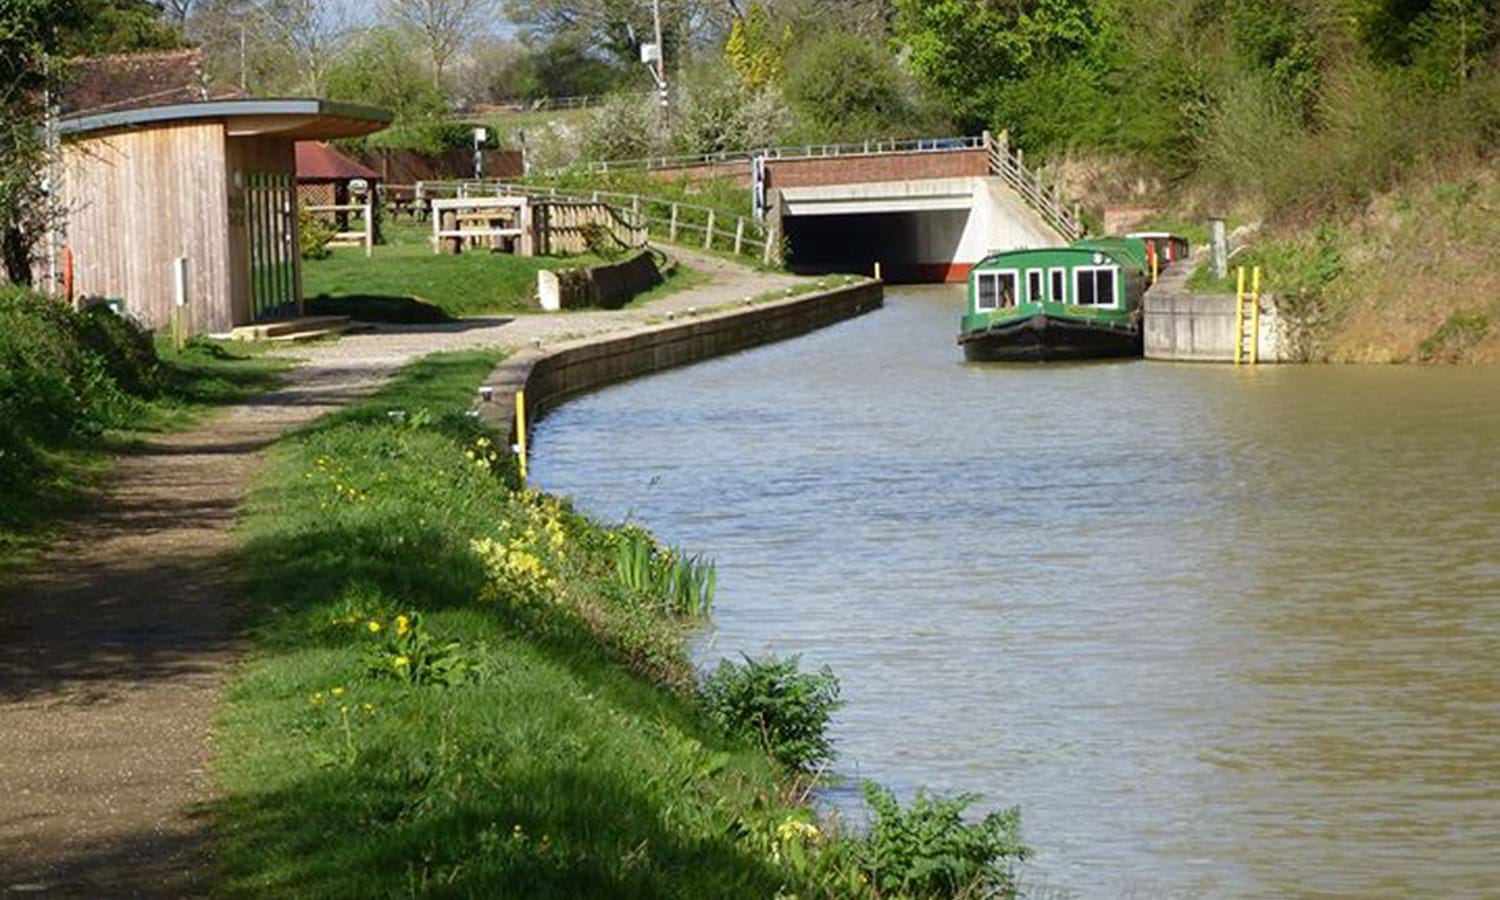 Wey and Arun canal - West Sussex County Council